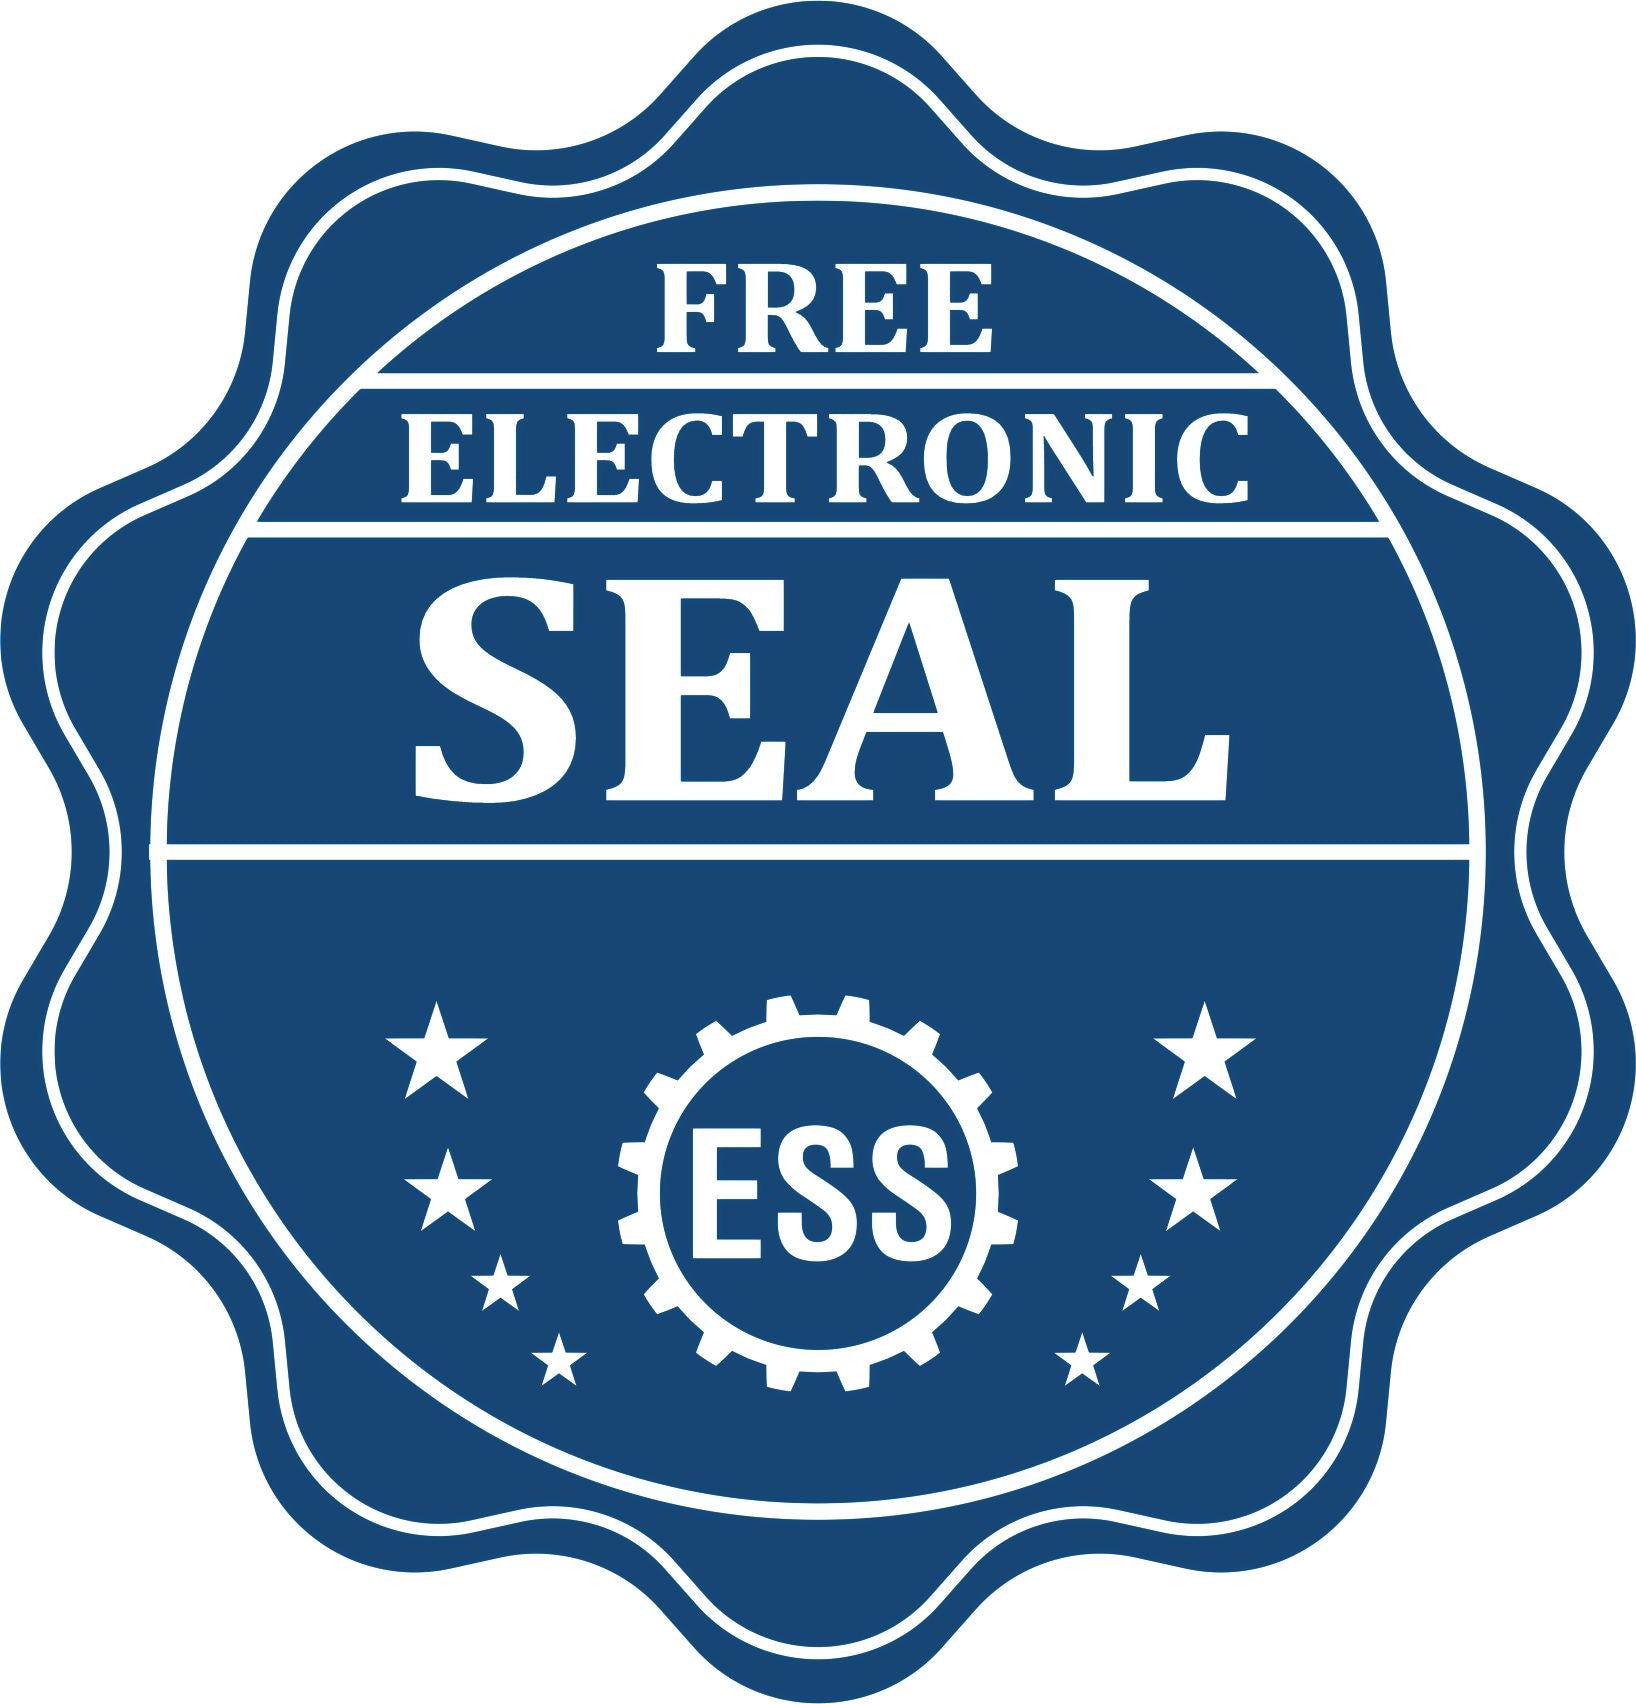 A badge showing a free electronic seal for the Kansas Desk Surveyor Seal Embosser with stars and the ESS gear on the emblem.